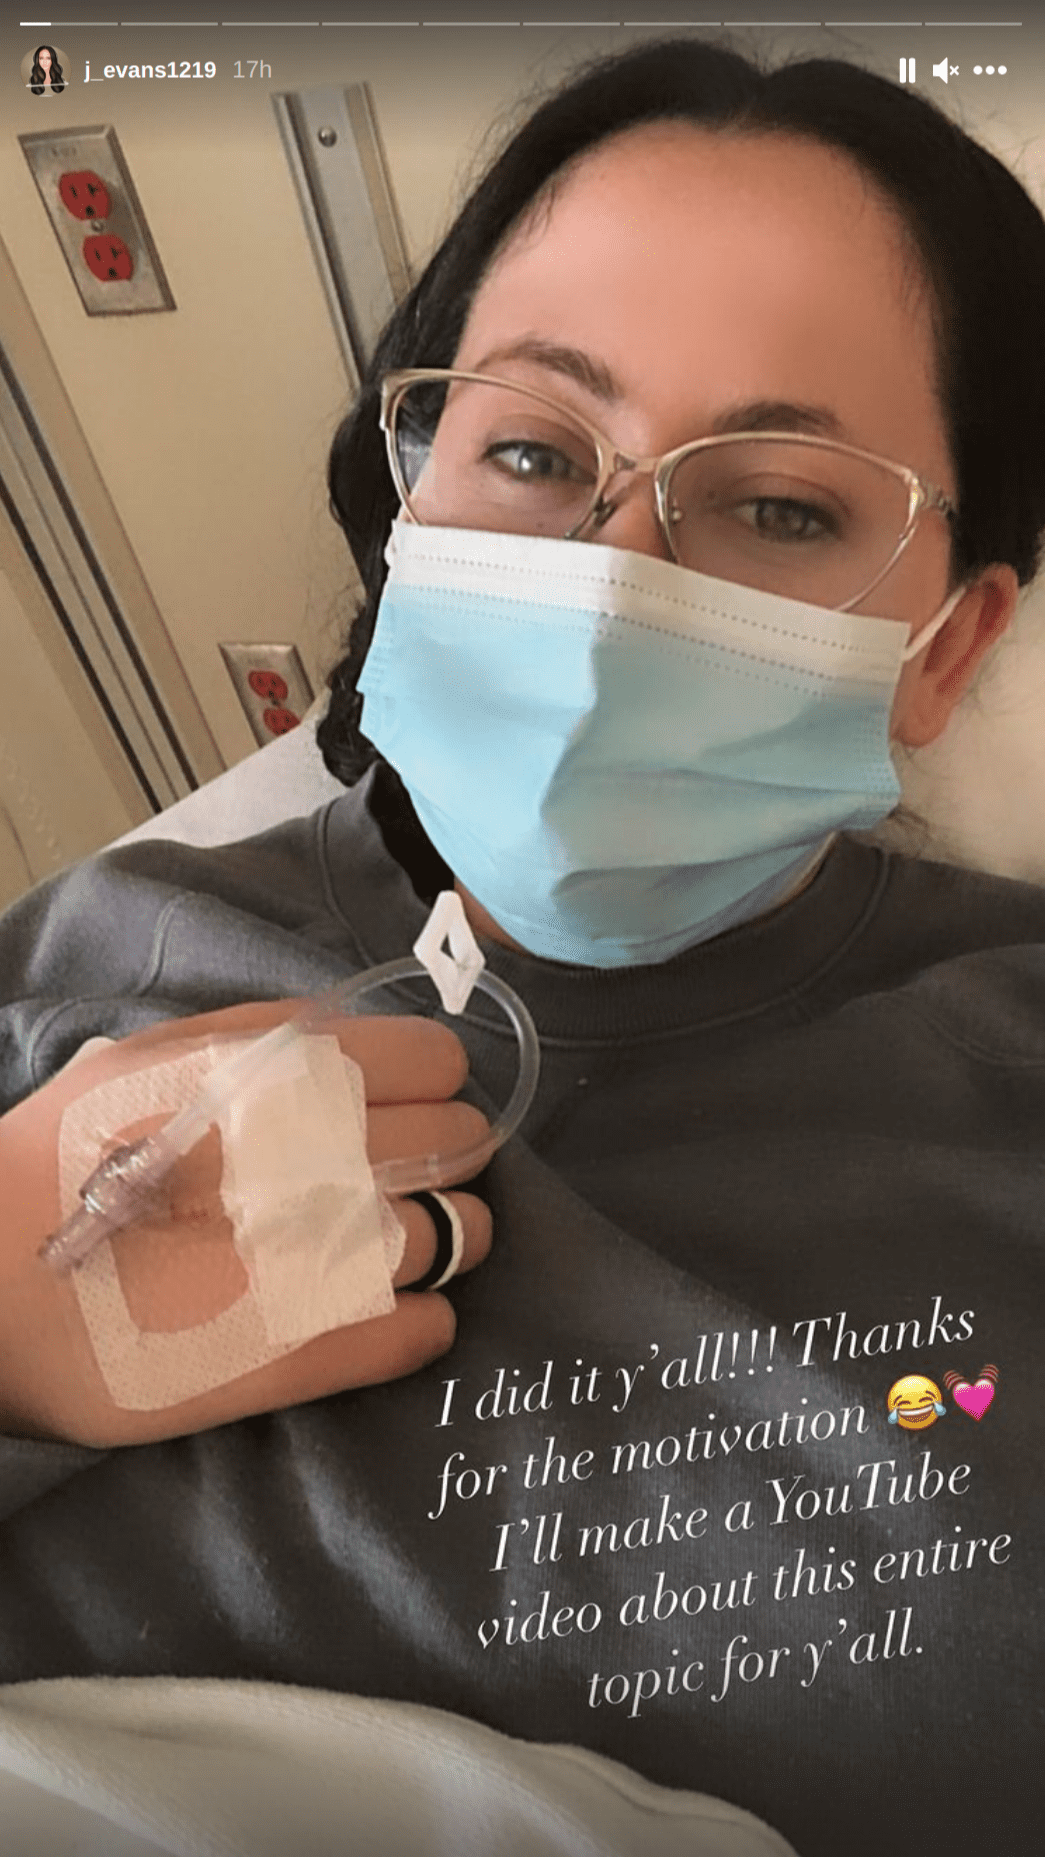 Jenelle Evans has been experiencing spinal cord issues. | Photo: Instagram/j_evans1219